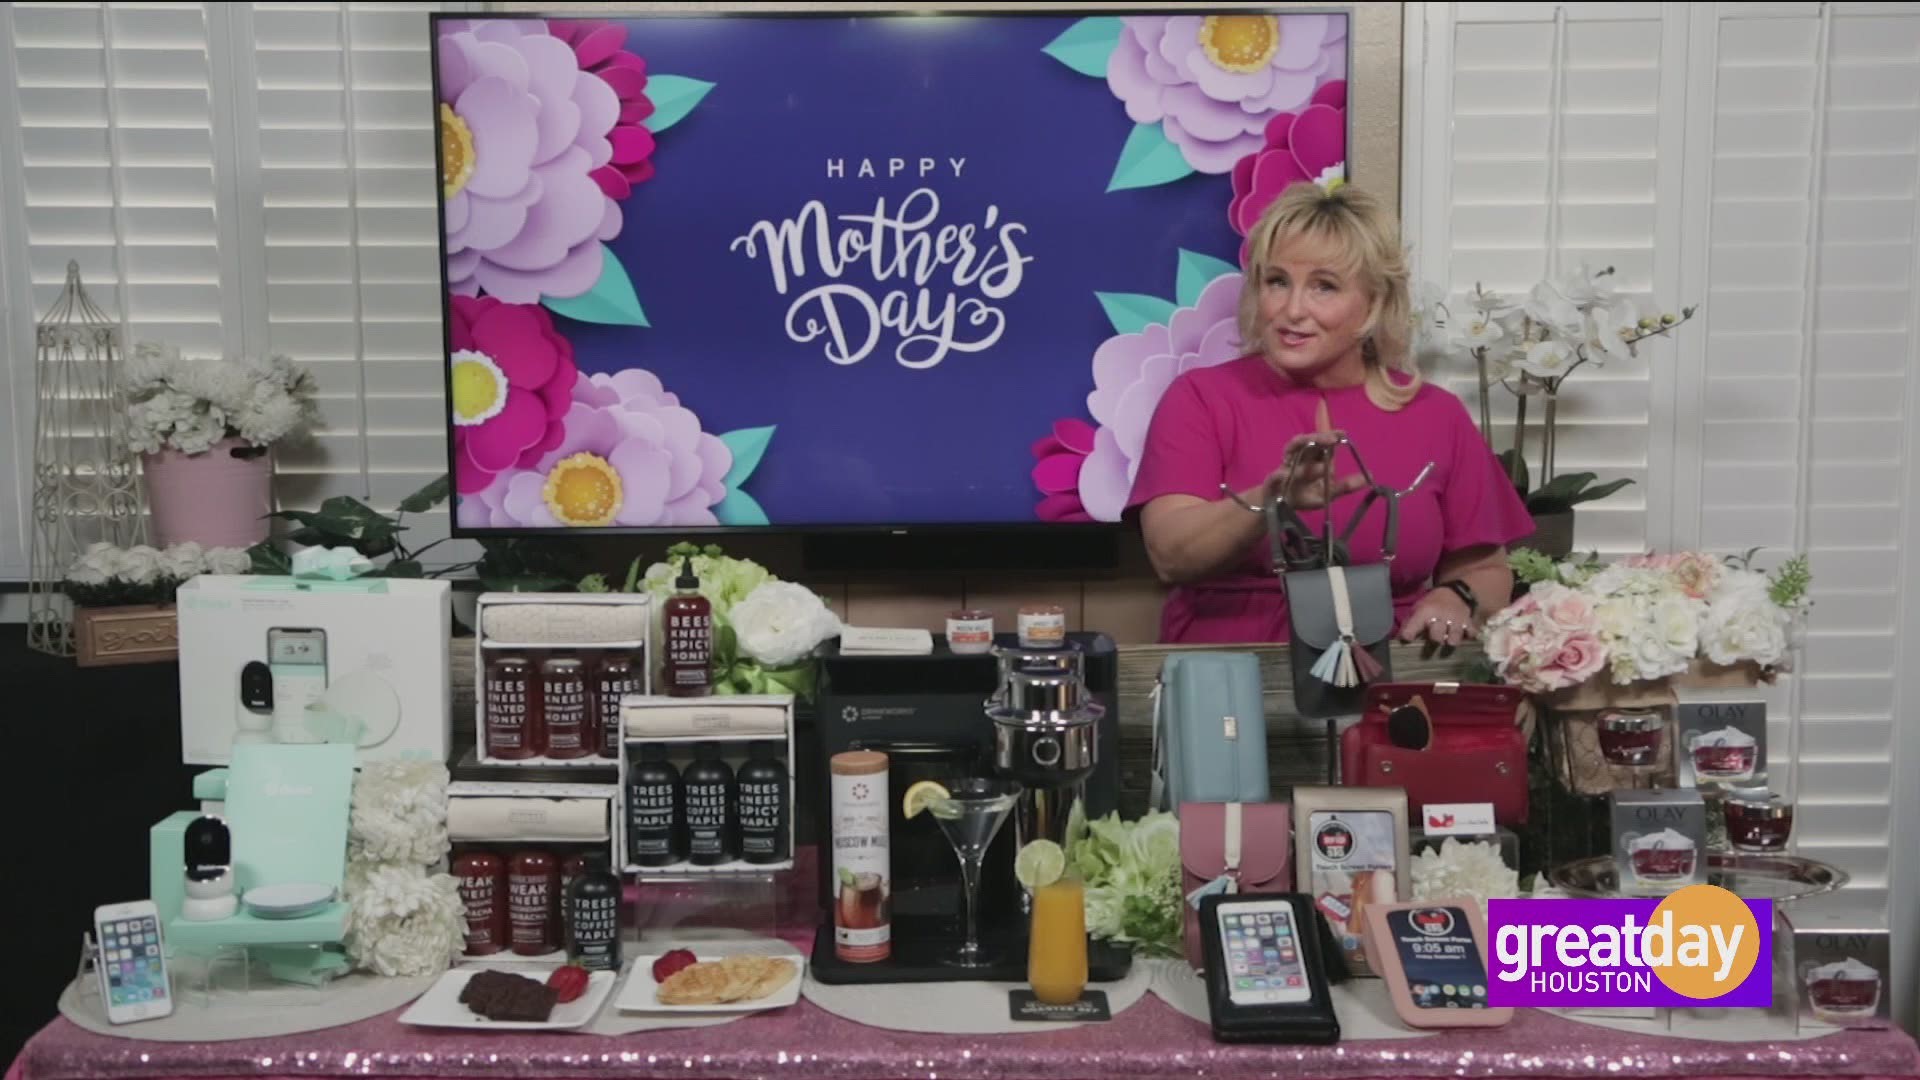 Dawn McCarthy has the perfect gift ideas – just in time for Mother's Day